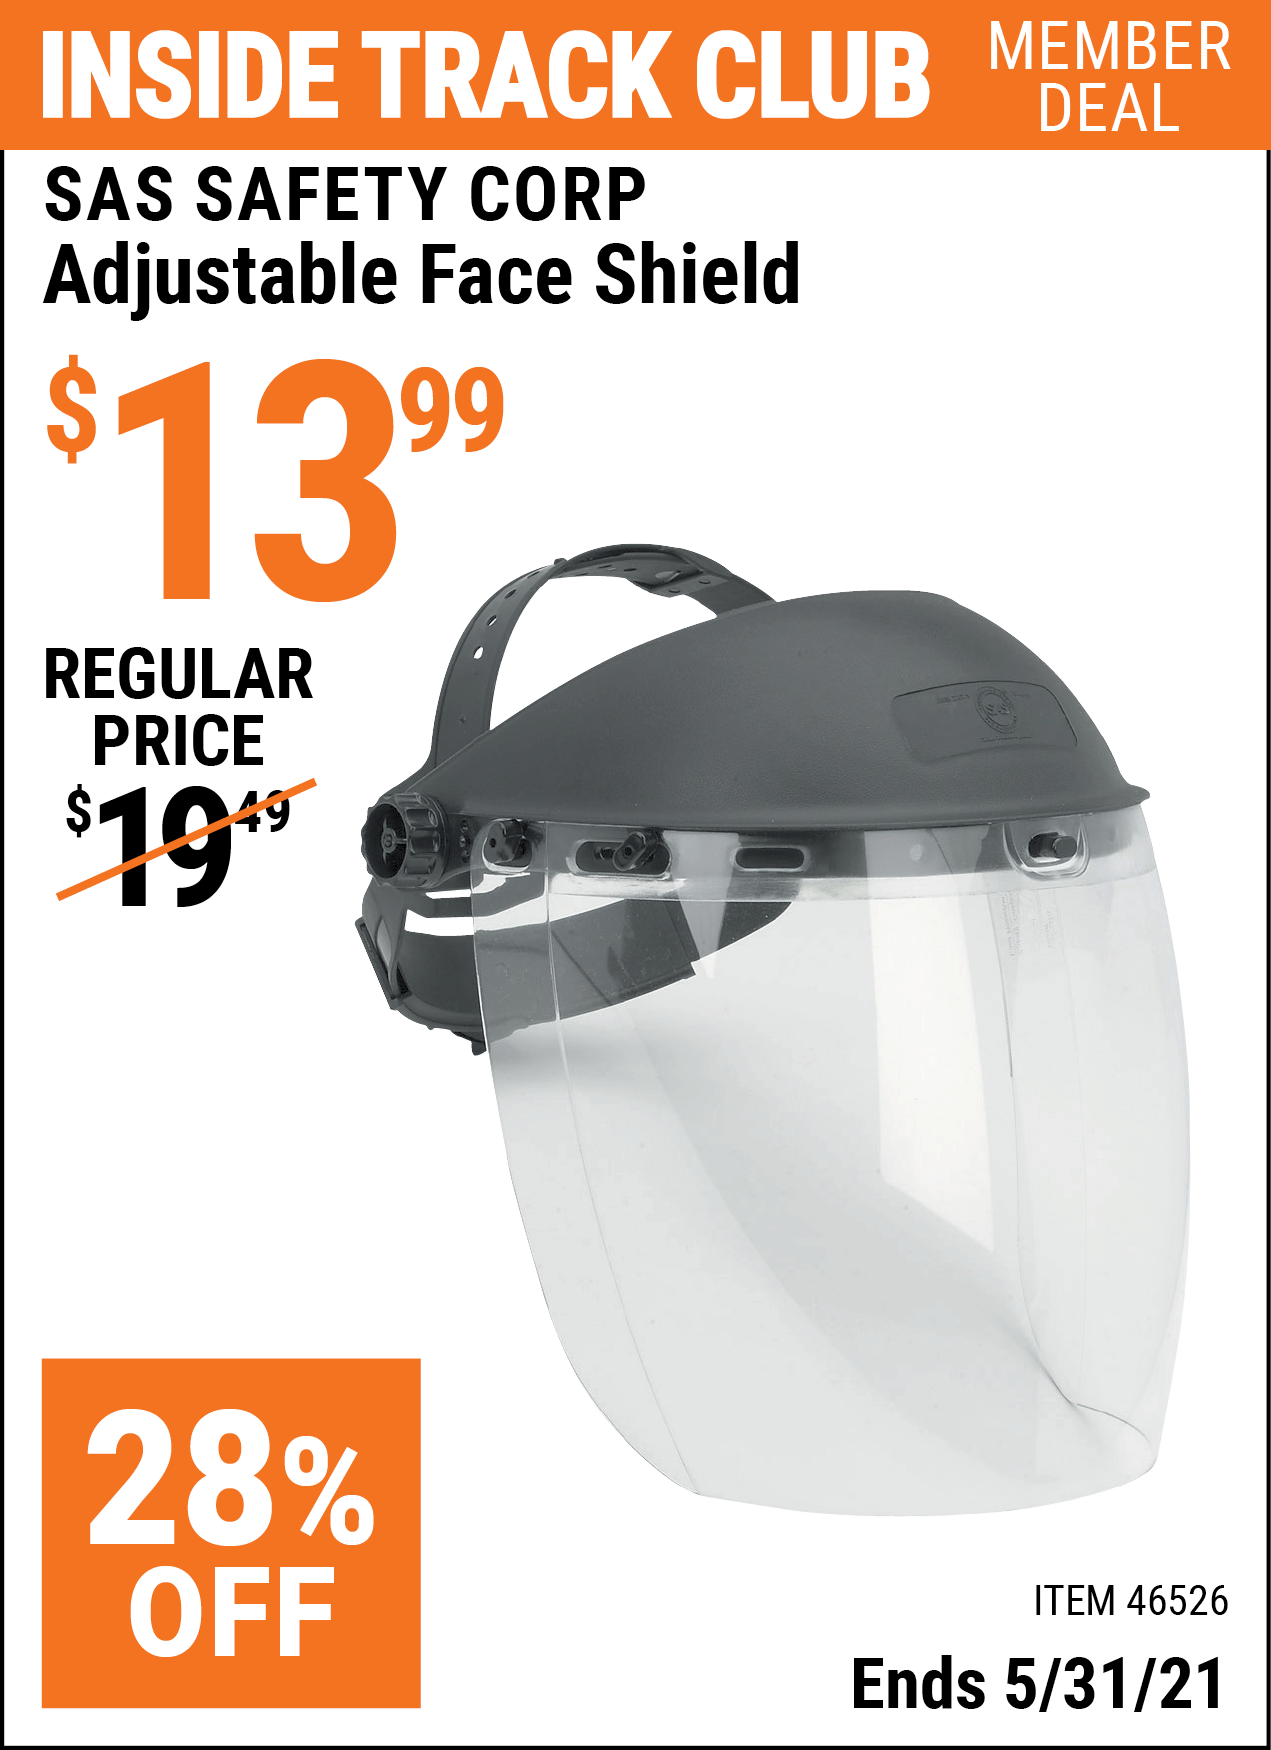 Inside Track Club members can buy the SAS SAFETY CORP Adjustable Face Shield (Item 46526) for $13.99, valid through 5/31/2021.